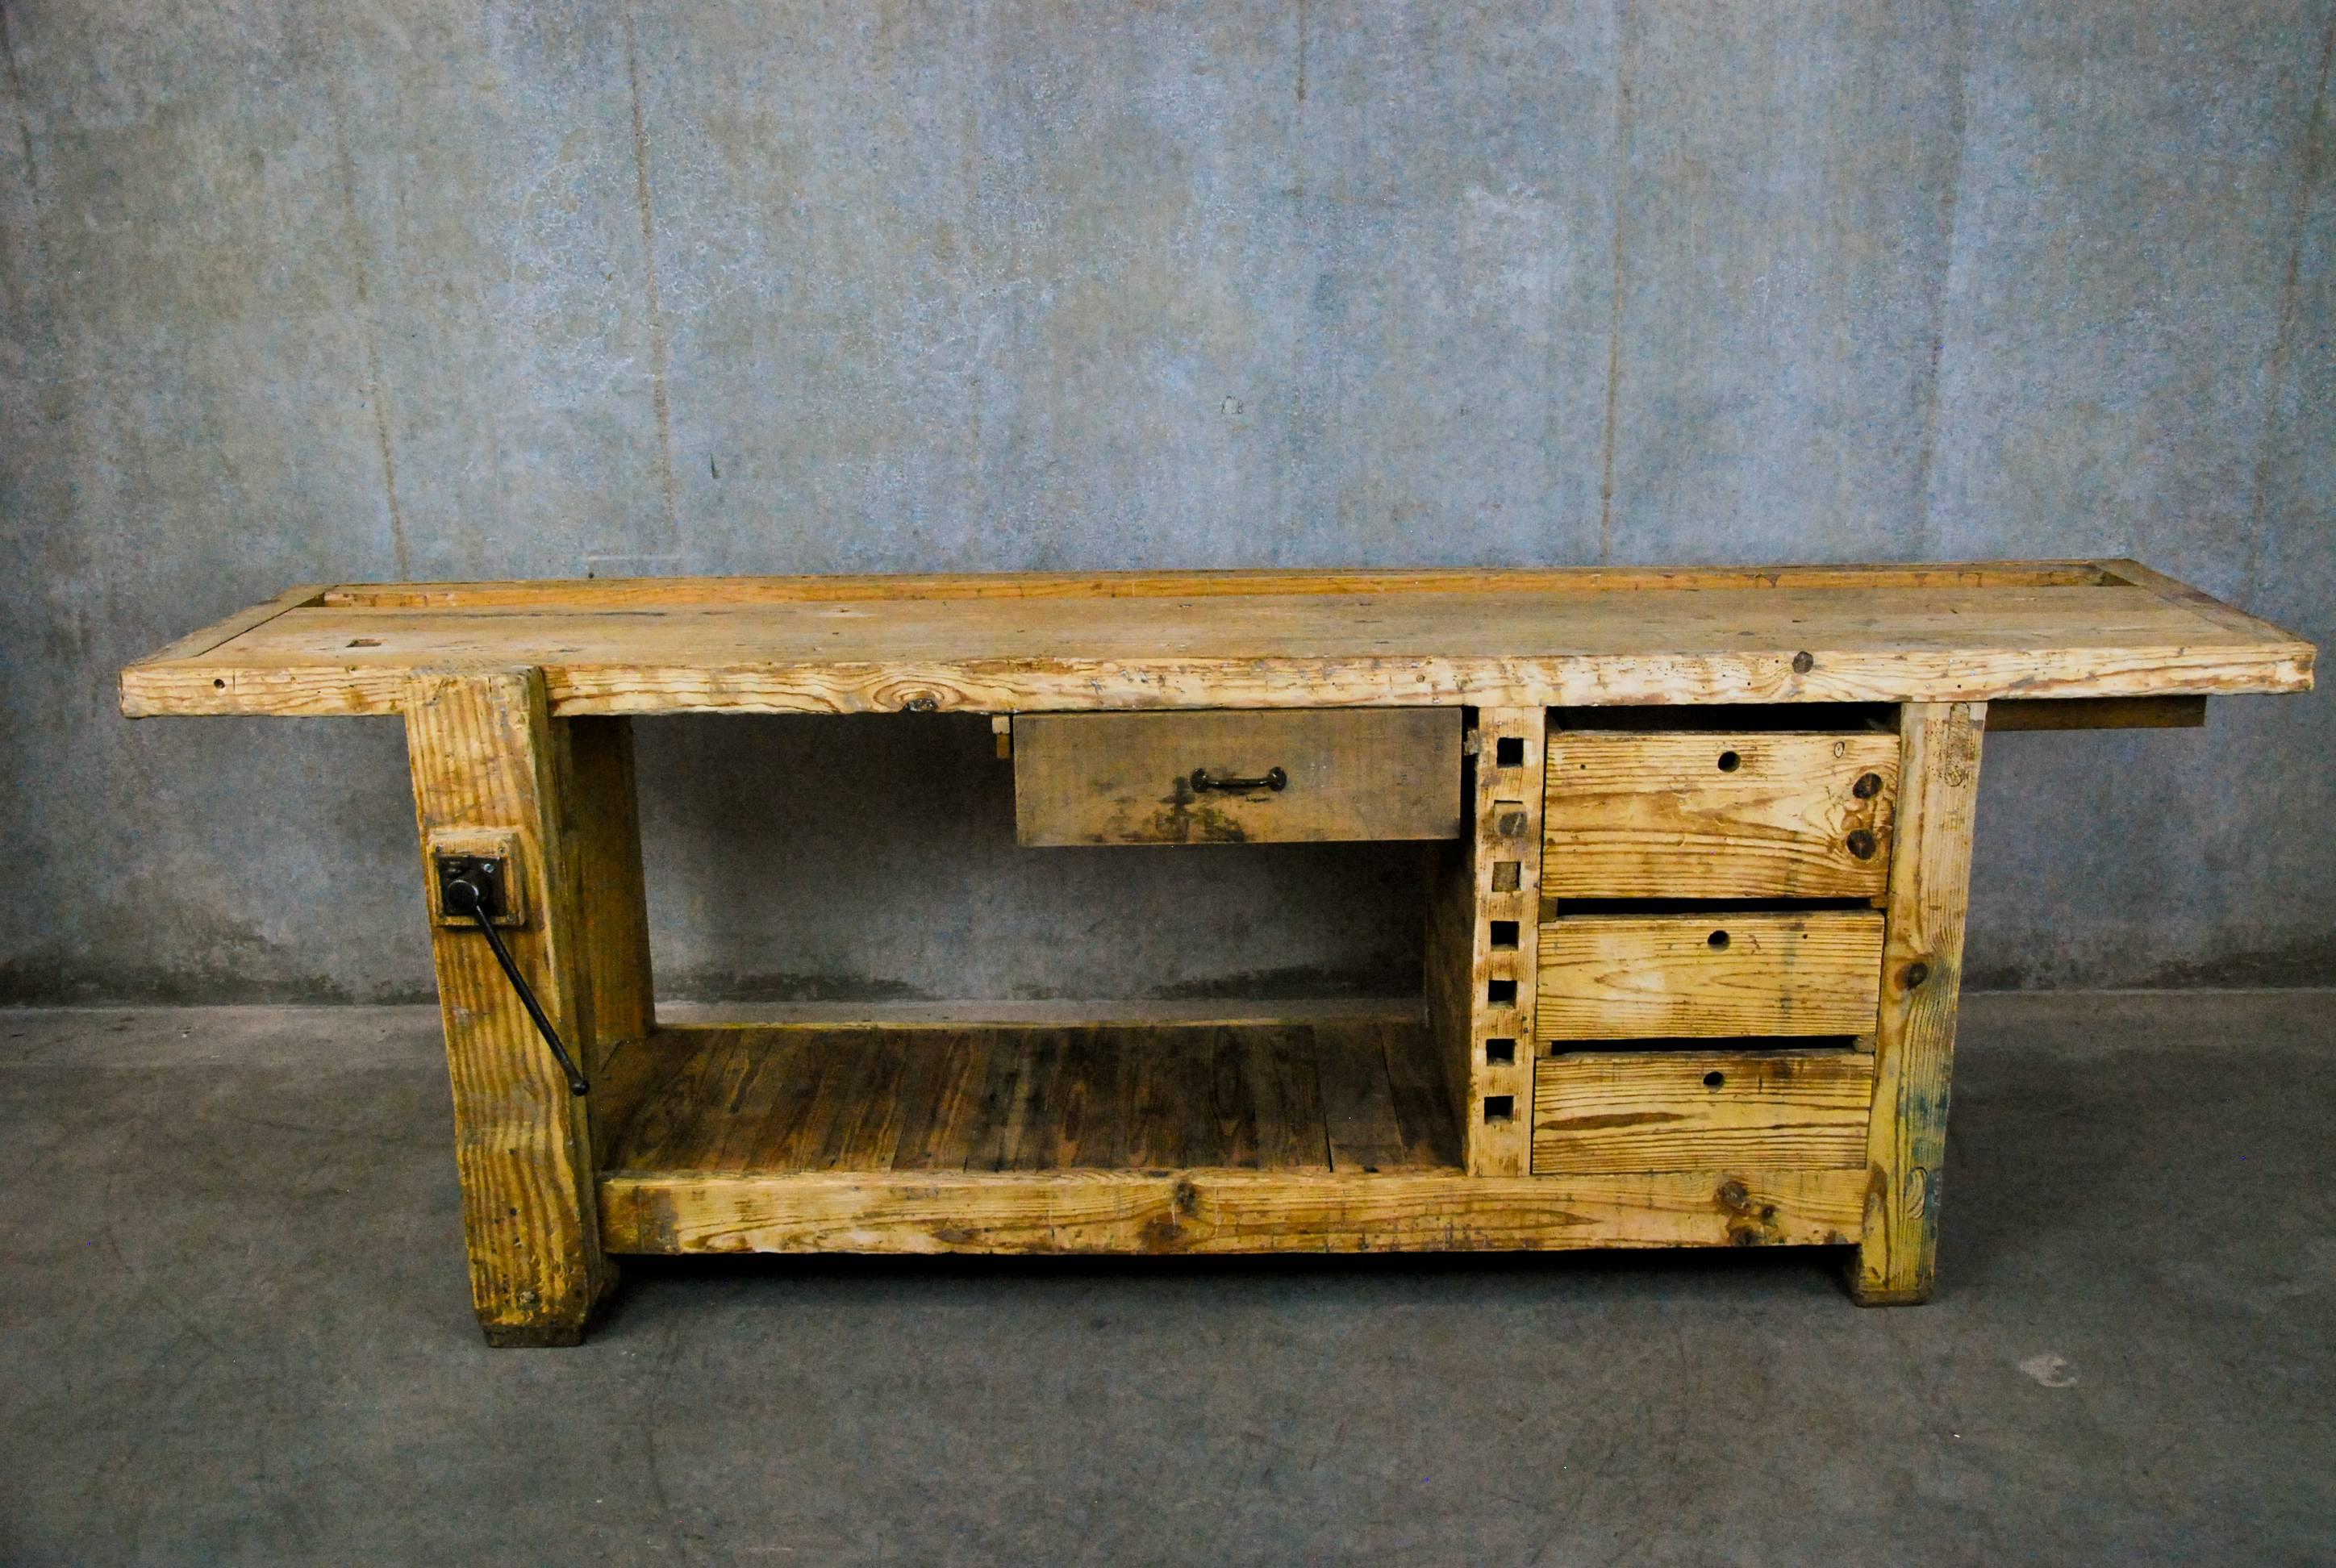 Carpenters bench showing nice wear and patina, showing a set of drawers and bottom storage shelf. We have handled a lot of these and a set of drawers is an uncommon feature.
Very solid, showing good wear.